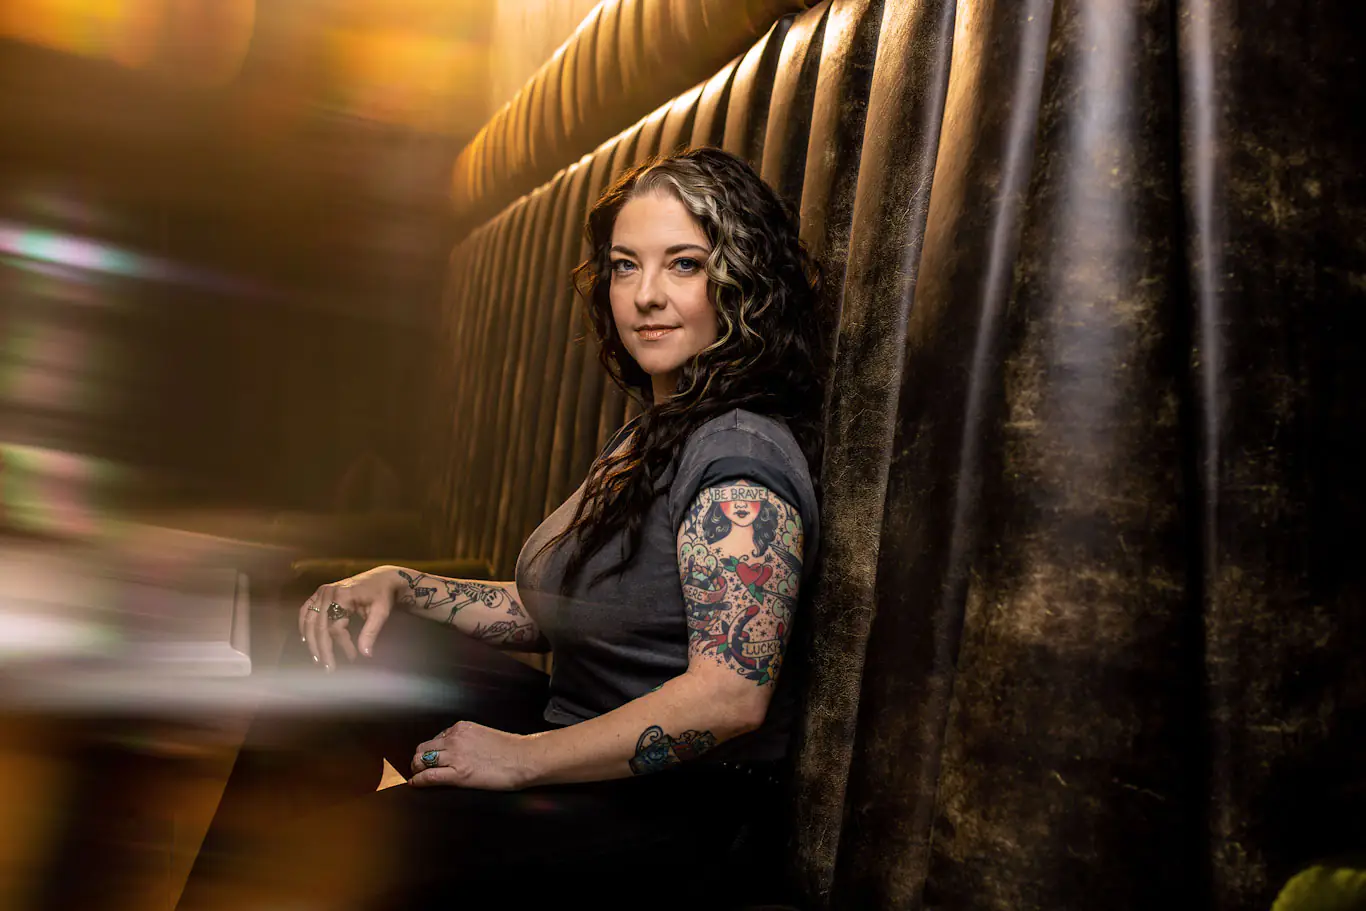 ASHLEY MCBRYDE returns to Belfast with a show at the Waterfront Hall on Saturday 27 January